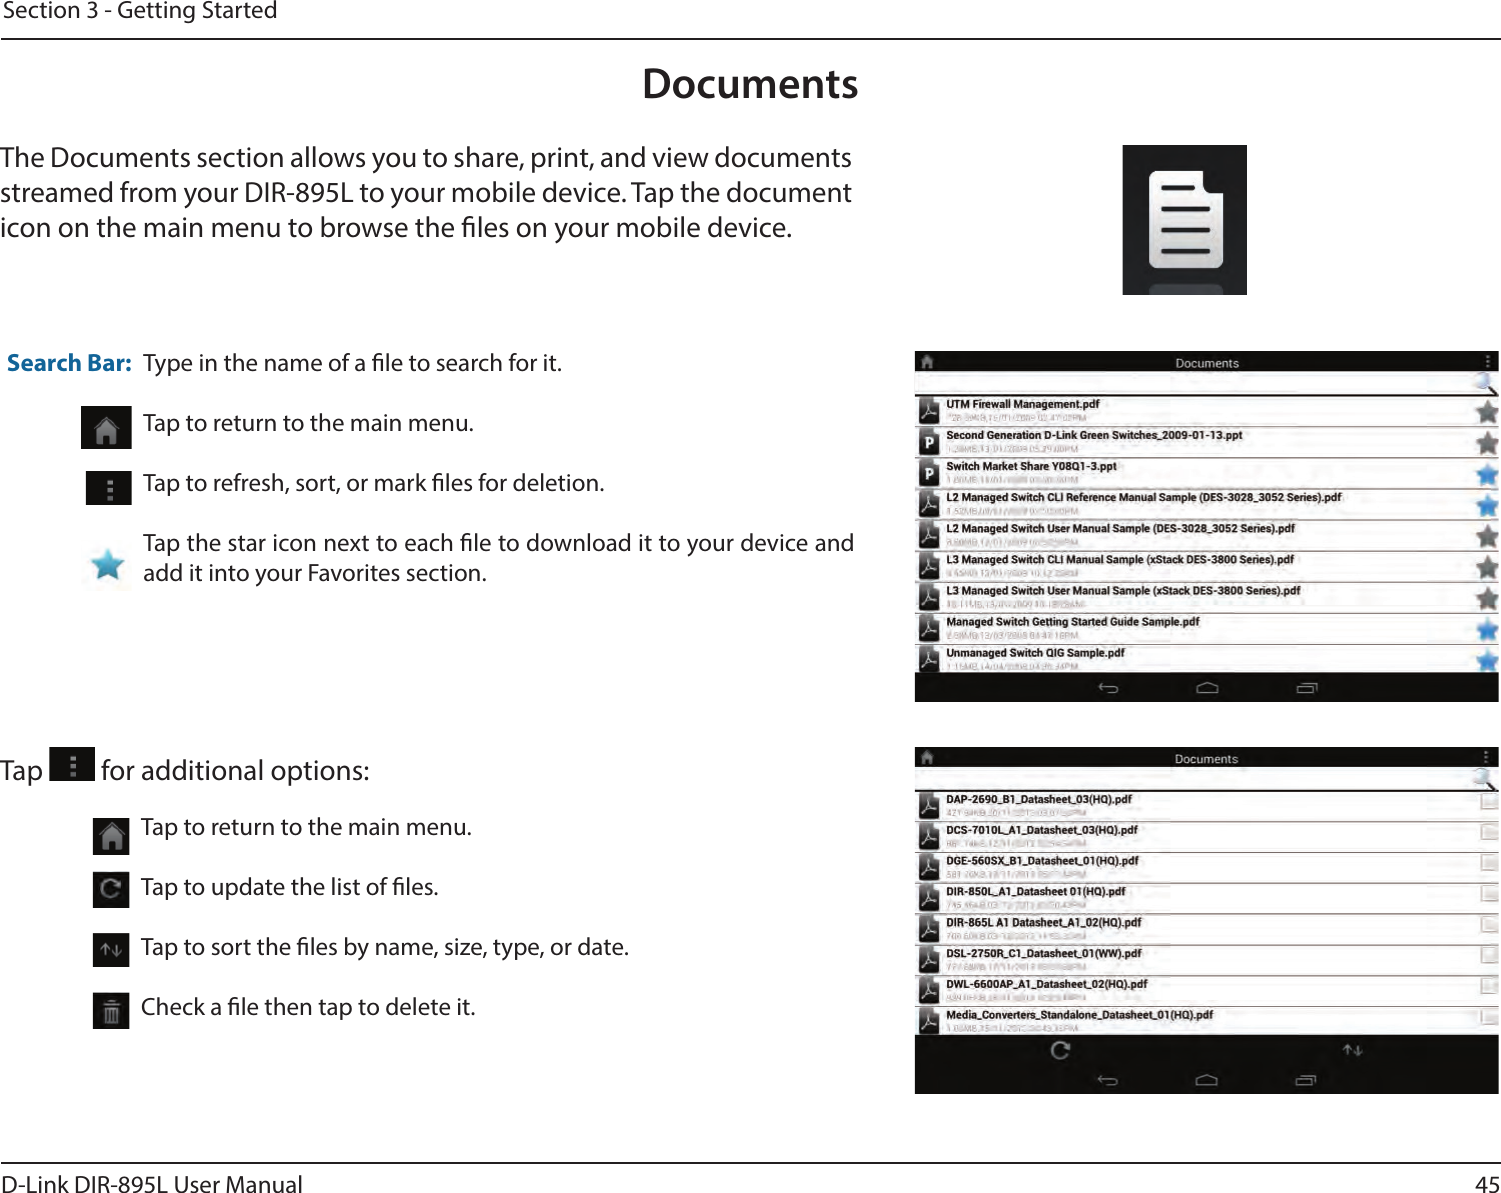 45D-Link DIR-895L User ManualSection 3 - Getting StartedDocumentsThe Documents section allows you to share, print, and view documents streamed from your DIR-895L to your mobile device. Tap the document icon on the main menu to browse the les on your mobile device.Type in the name of a le to search for it.Tap to return to the main menu.Tap to refresh, sort, or mark les for deletion.Tap the star icon next to each le to download it to your device and add it into your Favorites section.Search Bar:Tap   for additional options:Tap to return to the main menu.Tap to update the list of les.Tap to sort the les by name, size, type, or date.Check a le then tap to delete it.